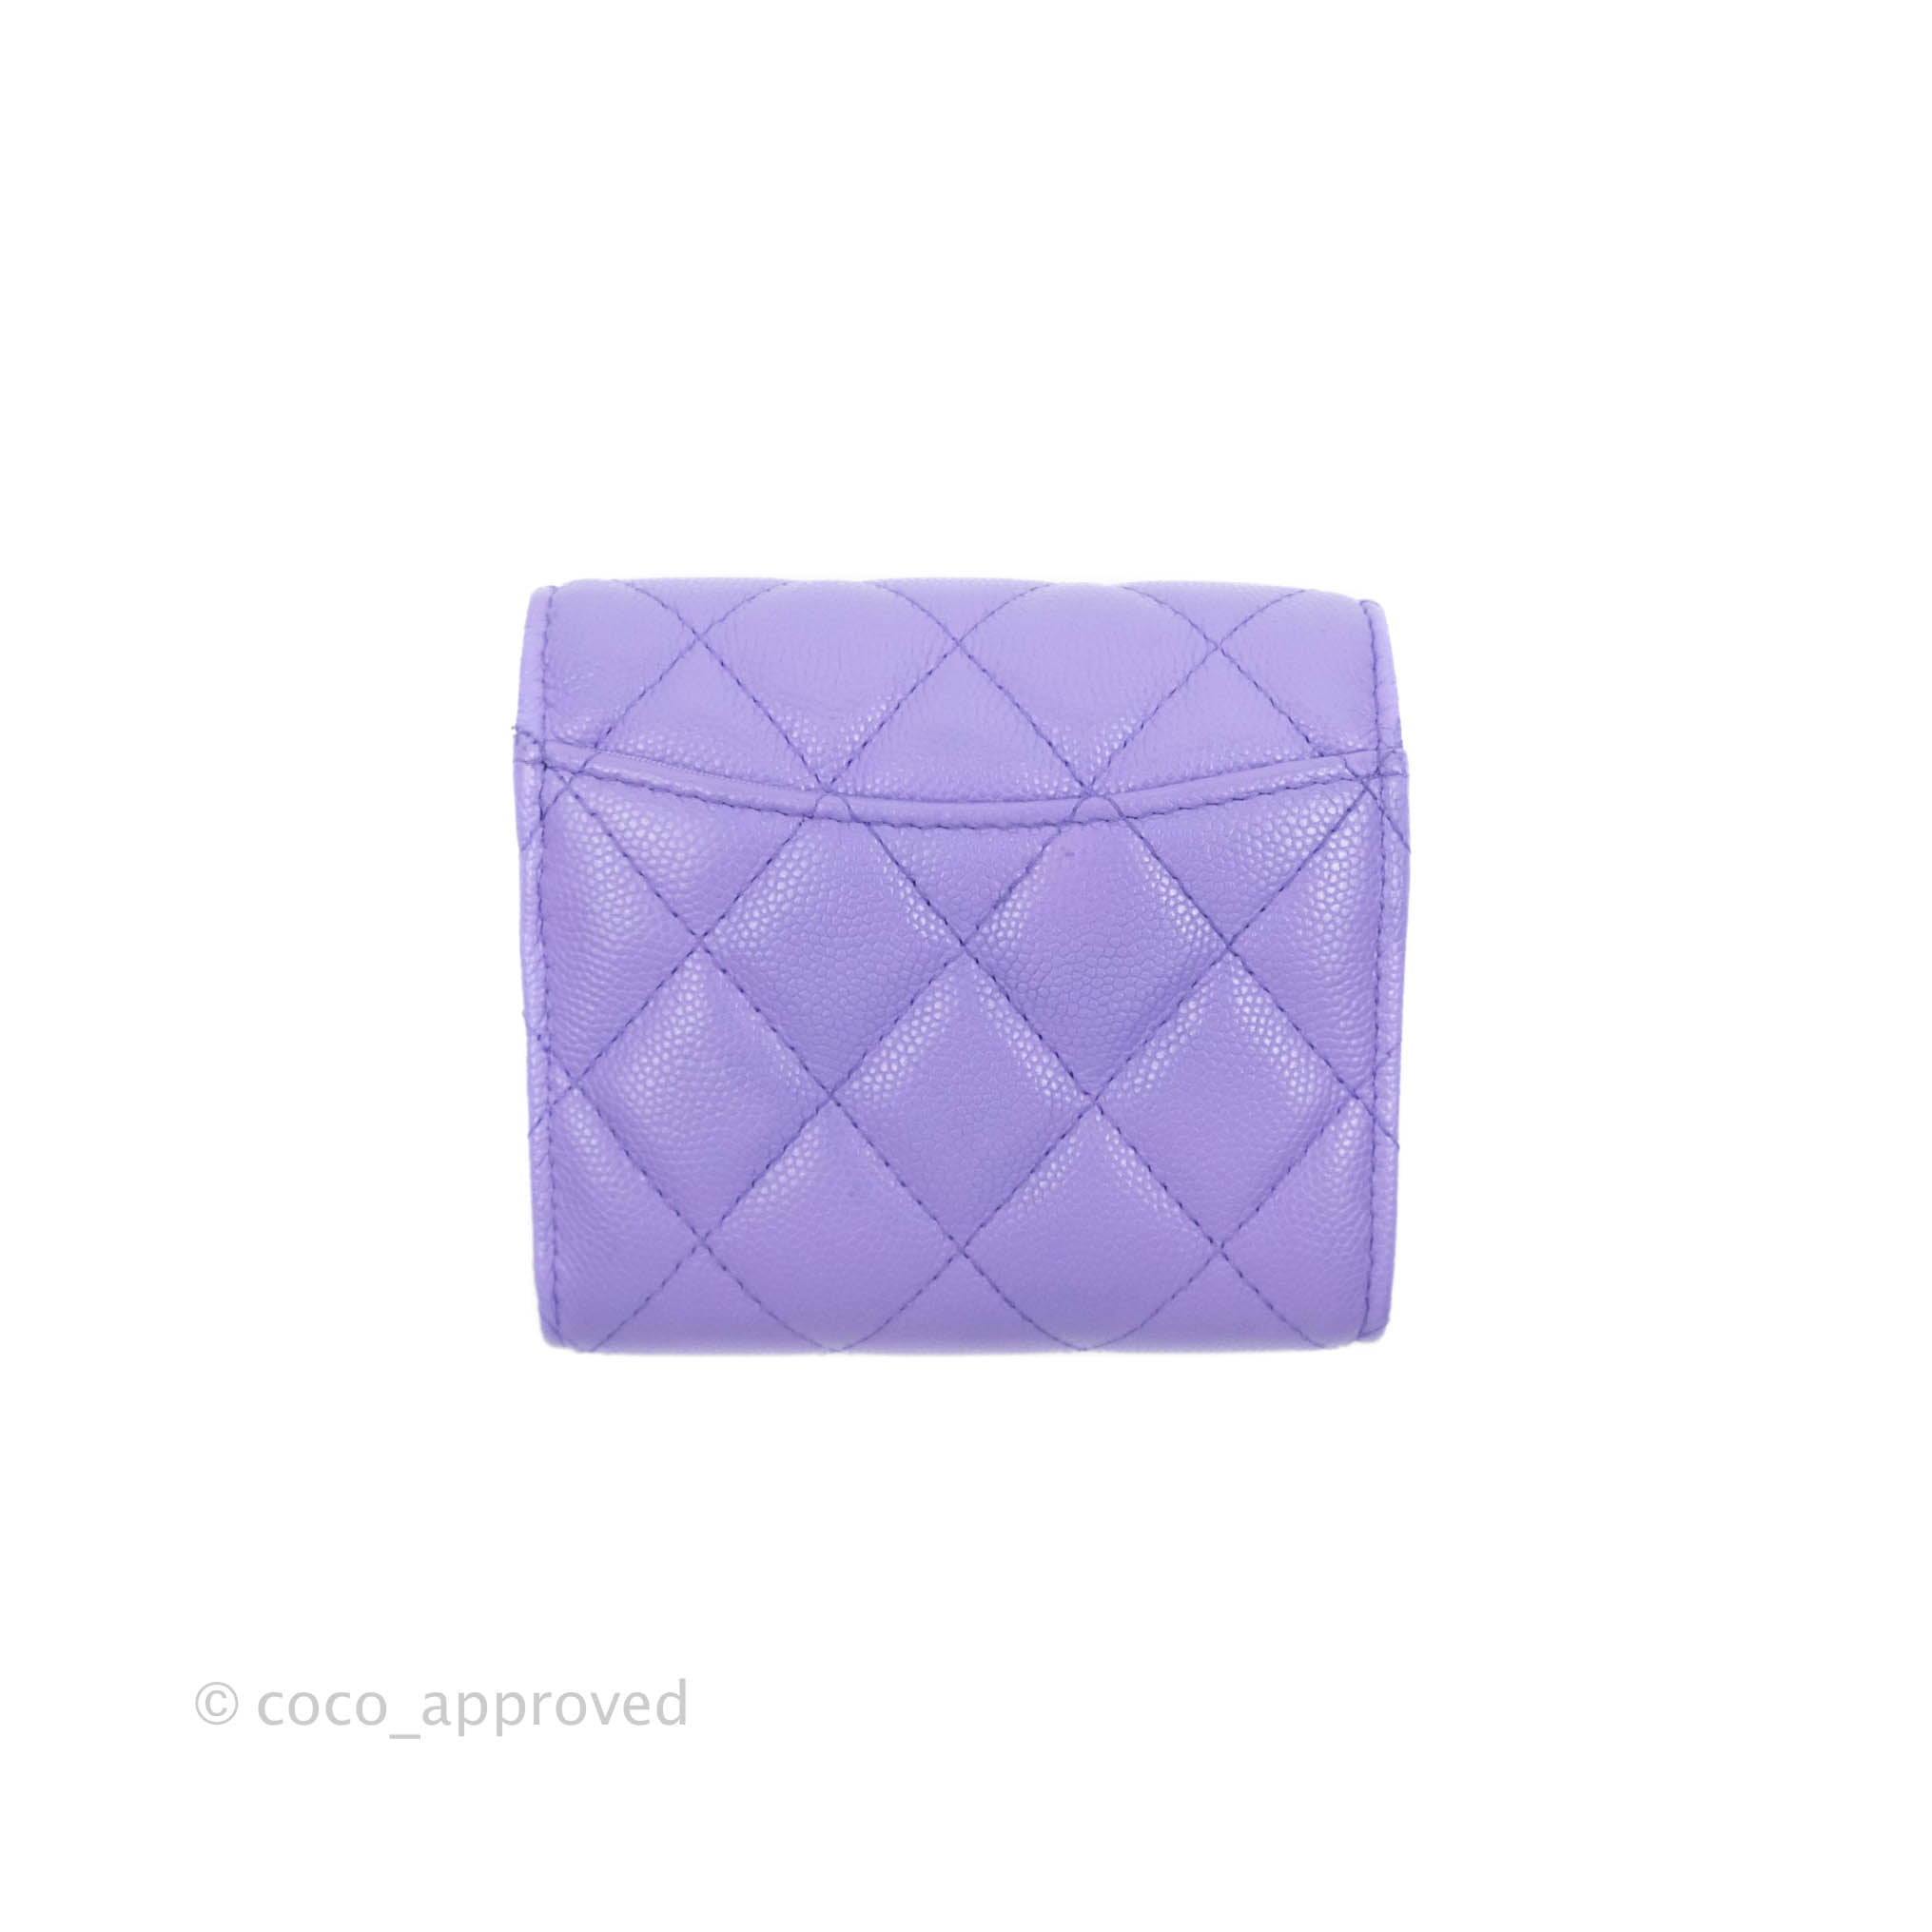 Timeless/classique leather card wallet Chanel Purple in Leather - 19972963